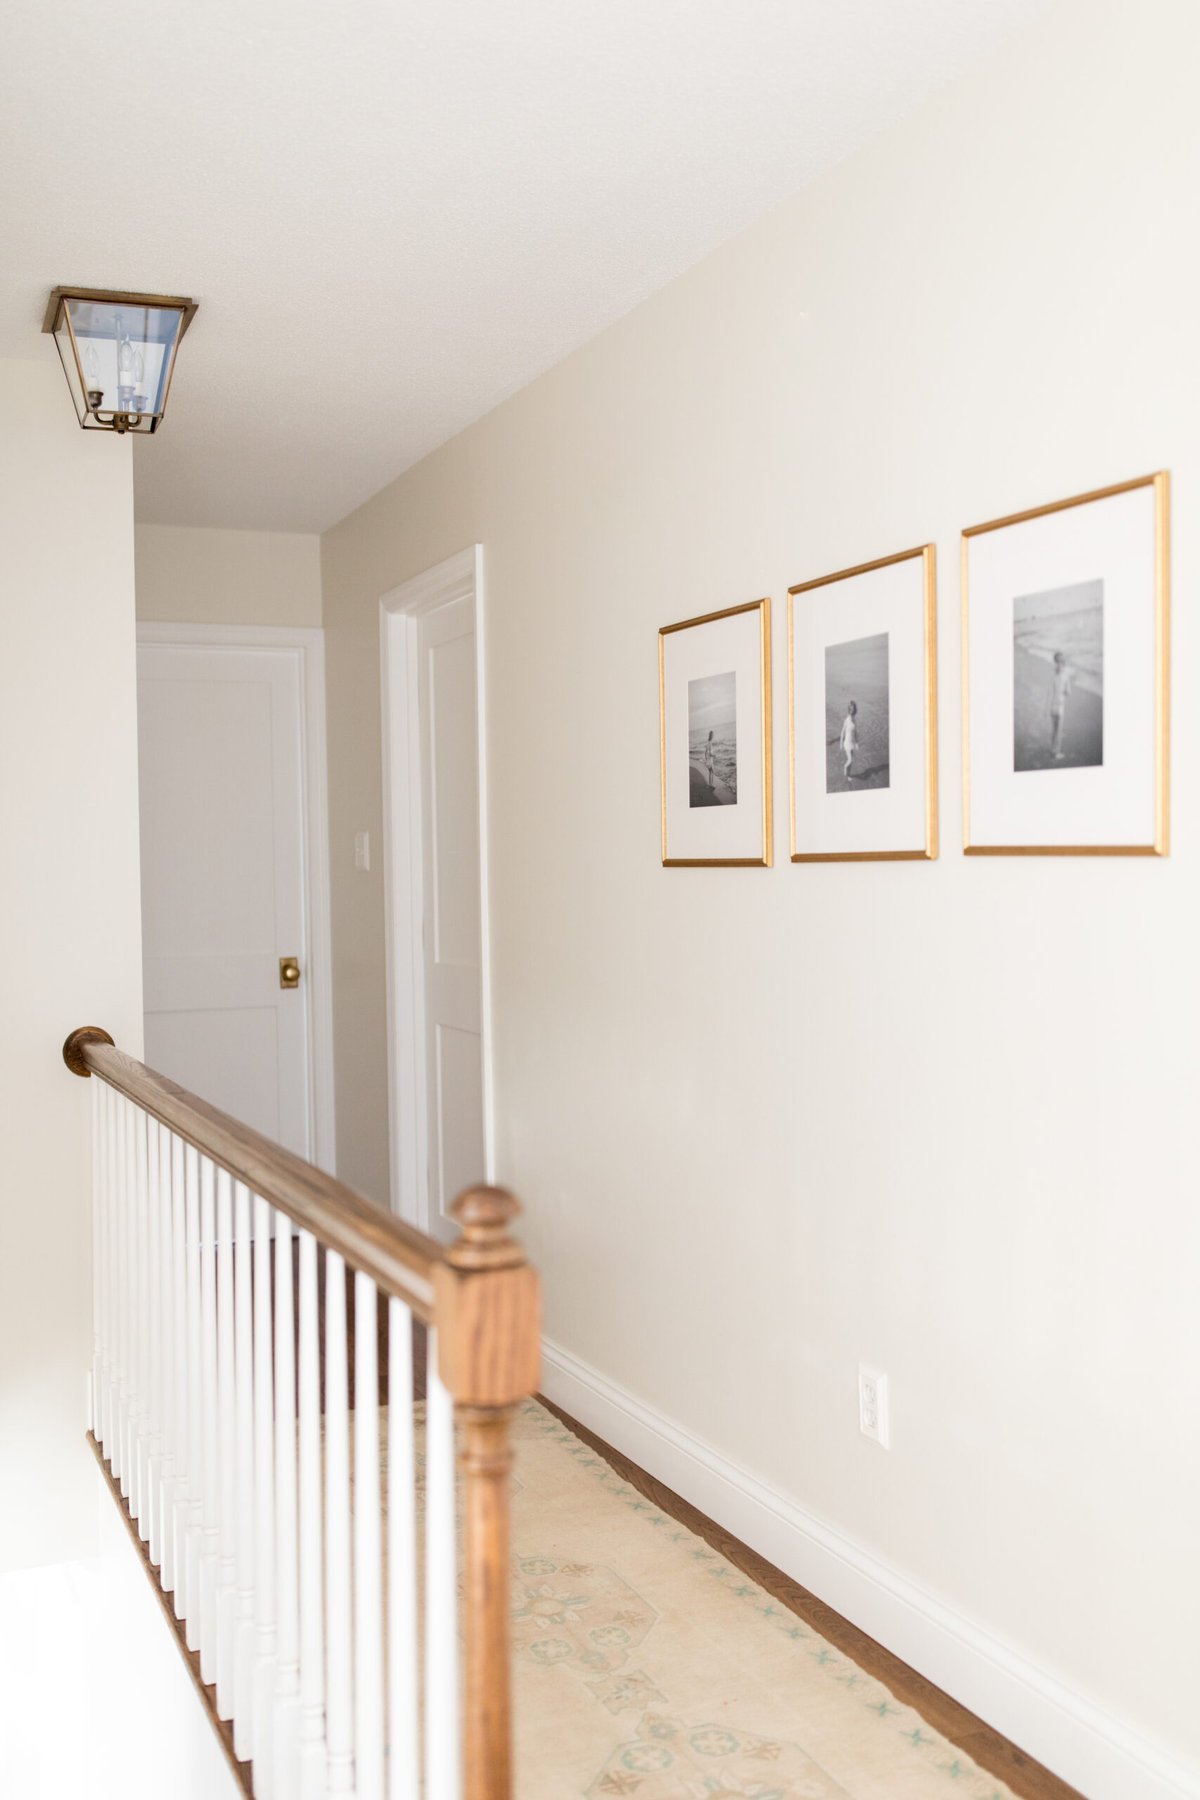 A hallway with a white railing and traditional rugs under framed pictures.